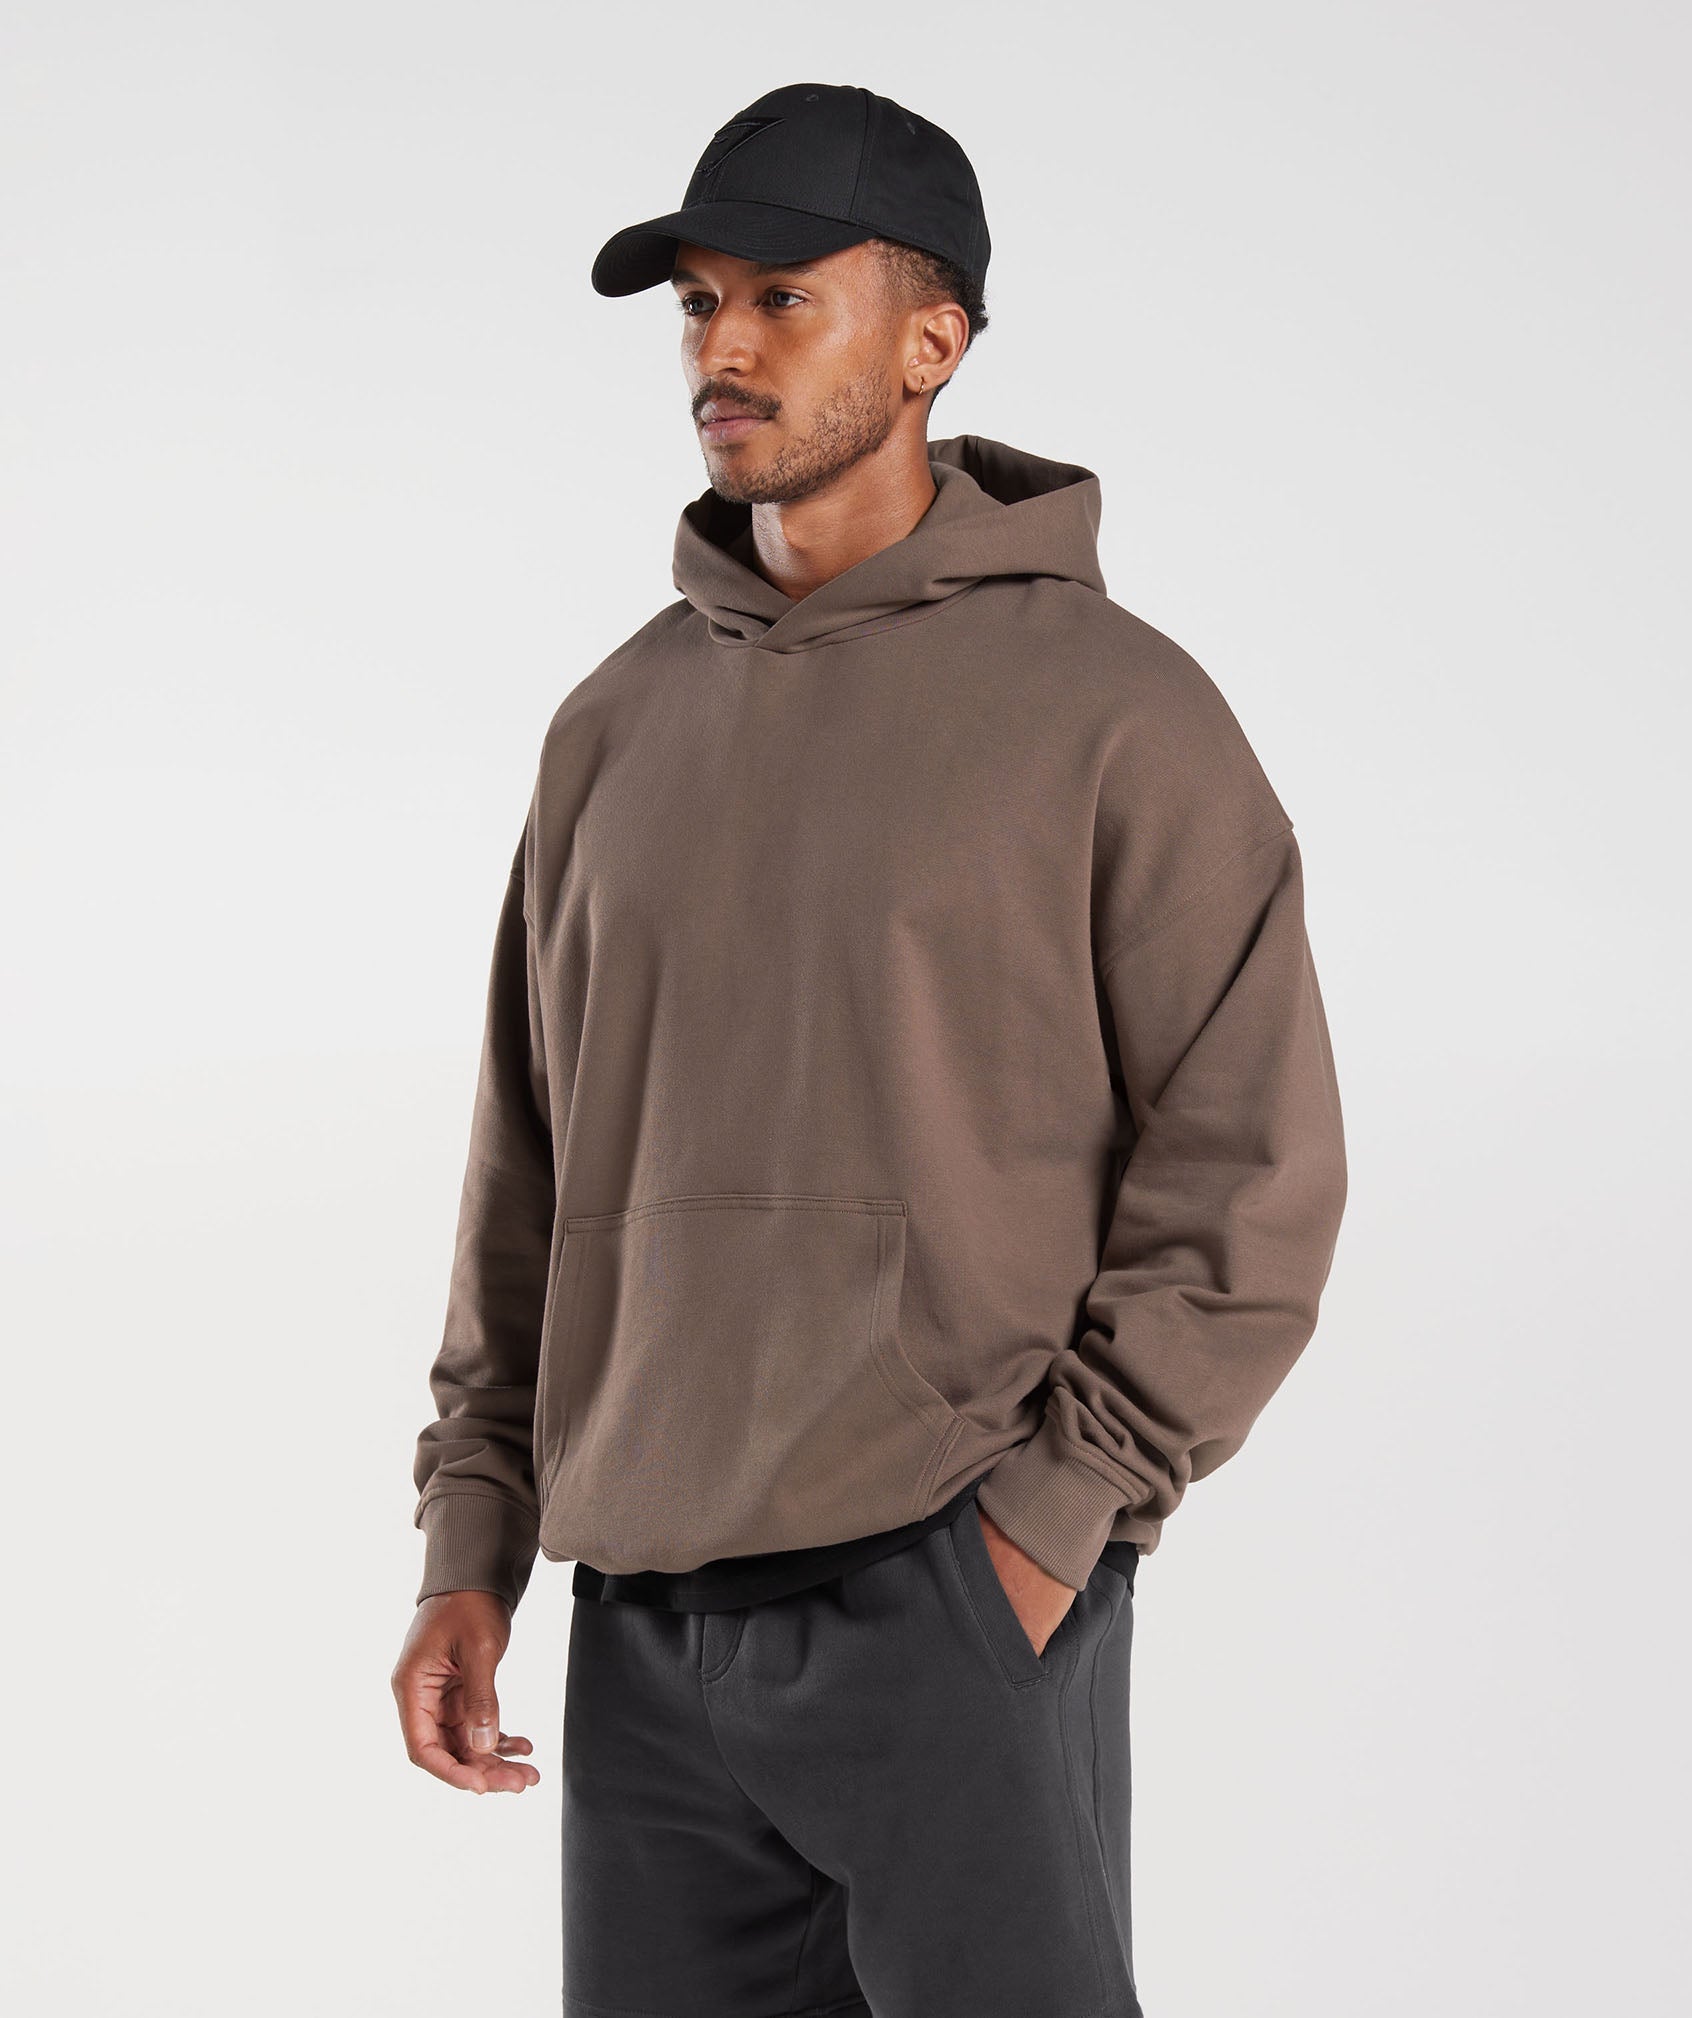 Rest Day Essentials Hoodie in Truffle Brown - view 3